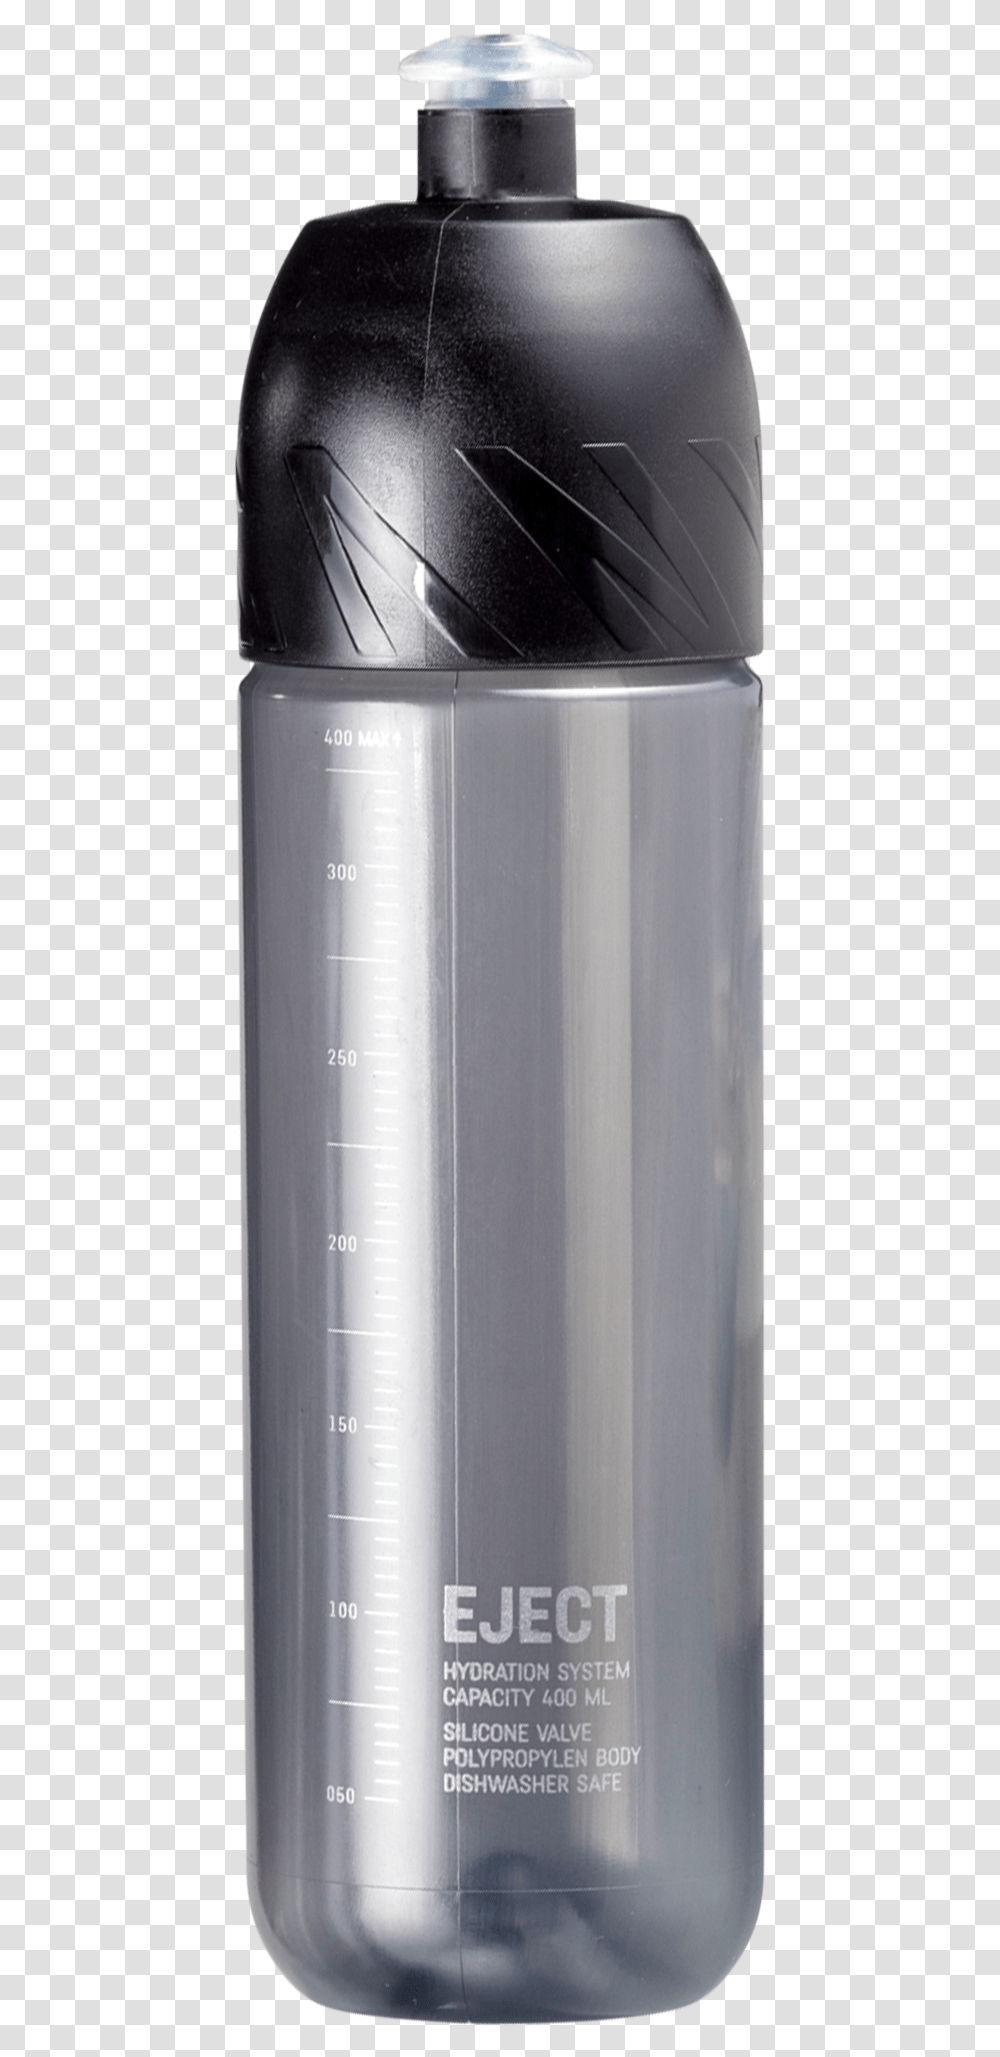 Canyon Eject Bottle Water Bottle, Cup, Measuring Cup, Aluminium, Shaker Transparent Png